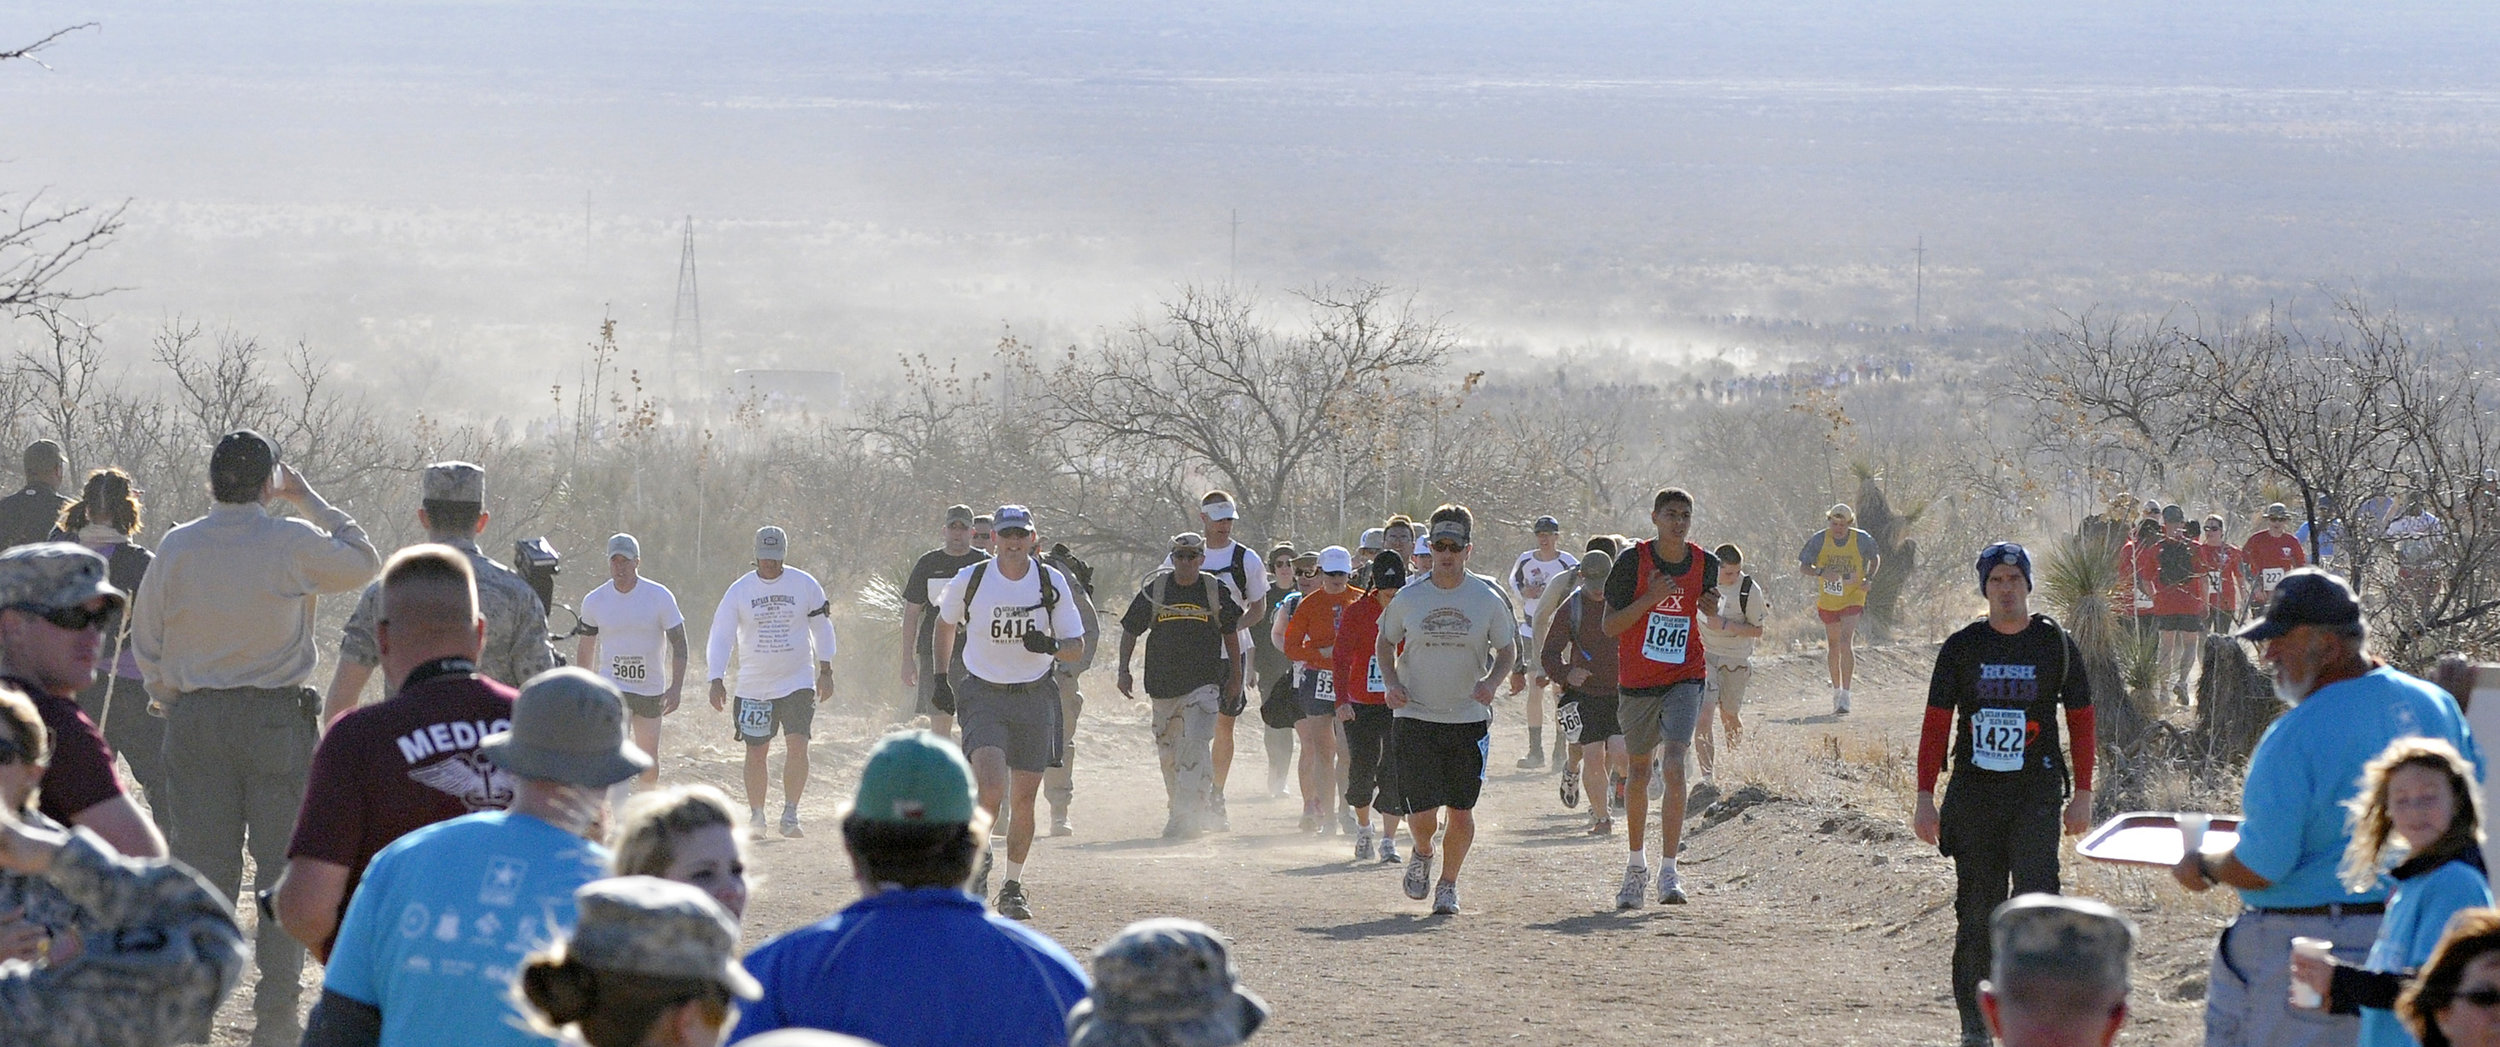  Walkers and runner emerge from the dusty desert of White Sands Missile Range during the 22nd Annual Bataan Memorial Death March, Sunday, March 27, 2011. (Morgan Petroski/Albuquerque Journal) 